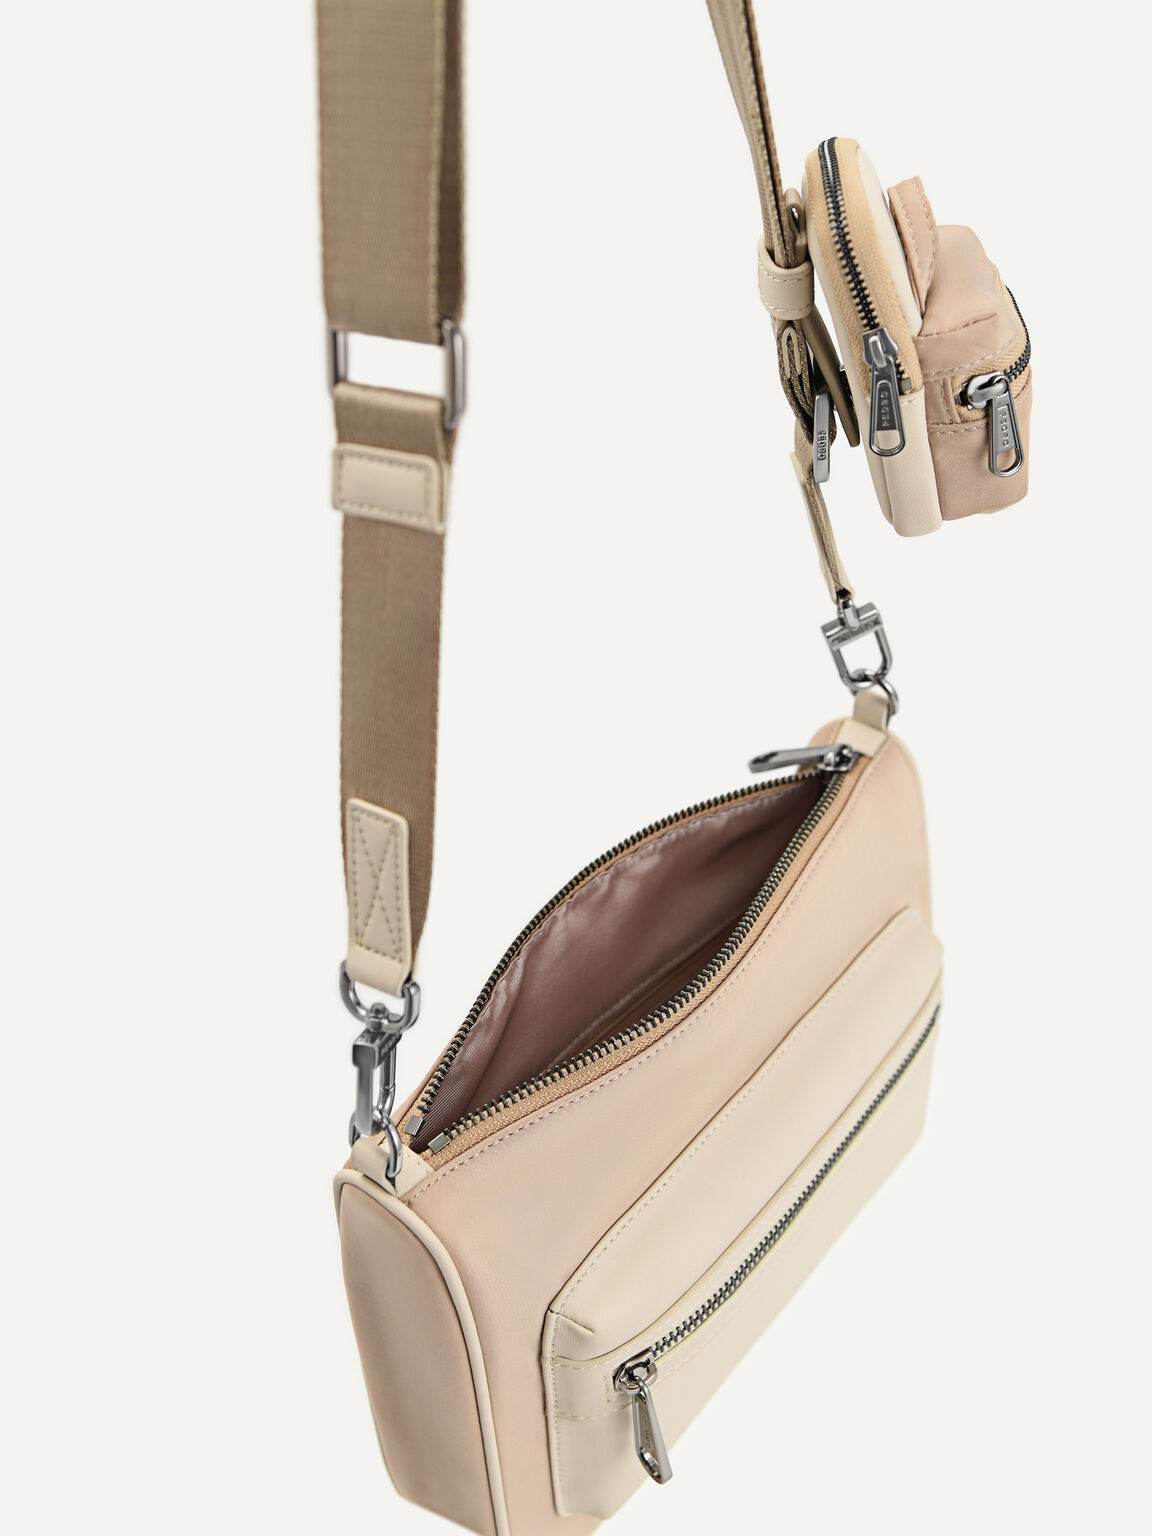 Nylon Sling Bag with Pouch, Beige